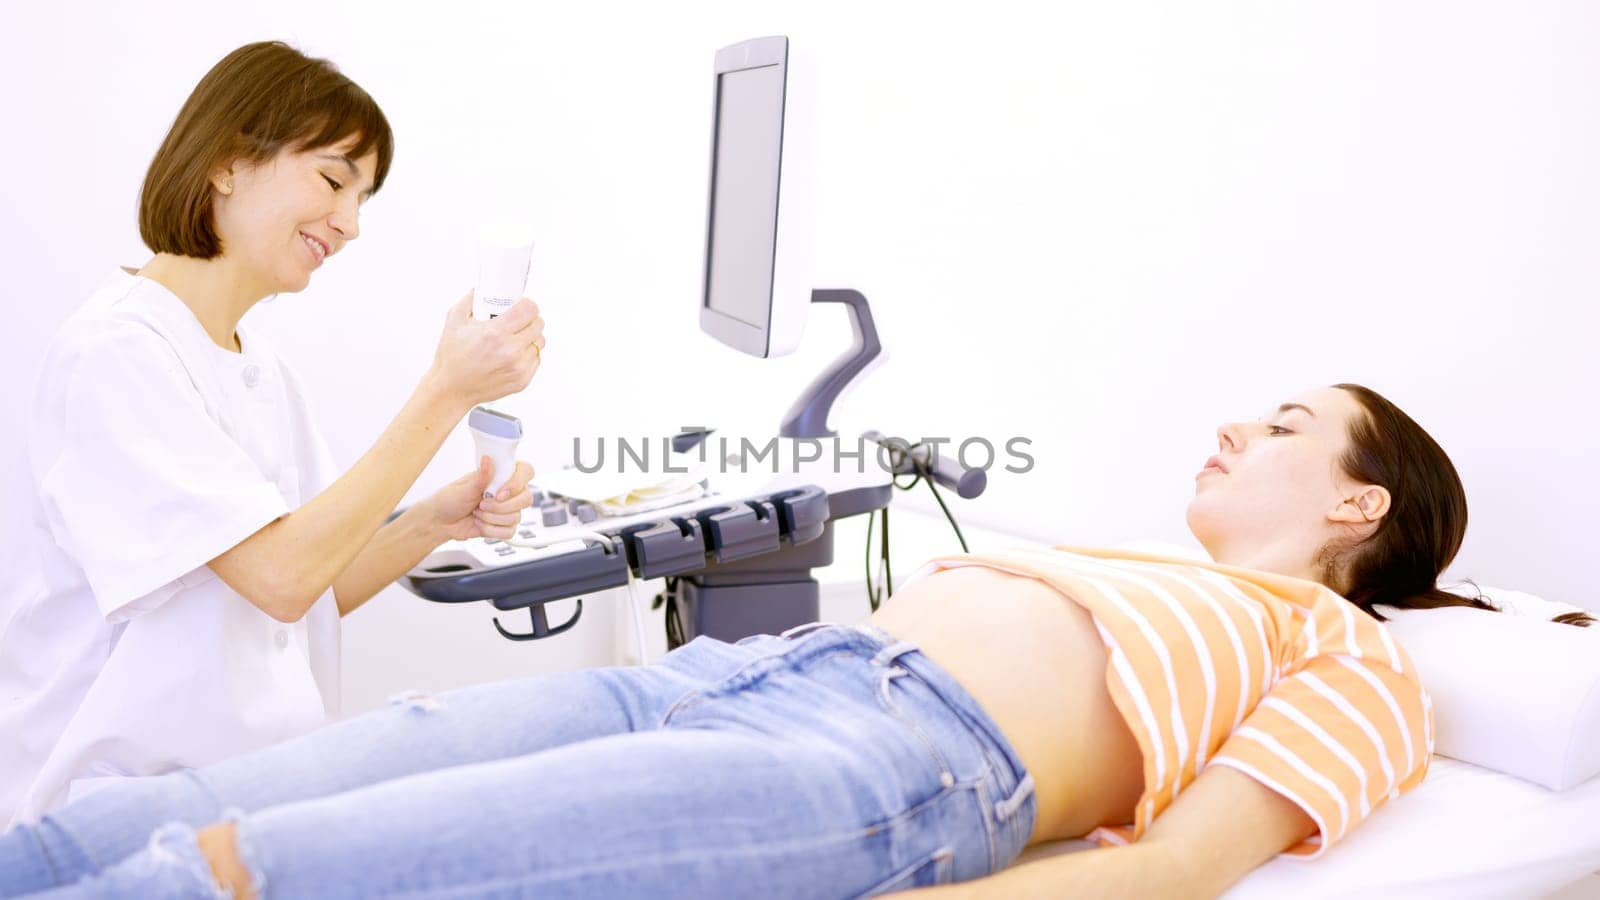 Doctor getting ready for an ultrasound to a pregnant woman by ivanmoreno